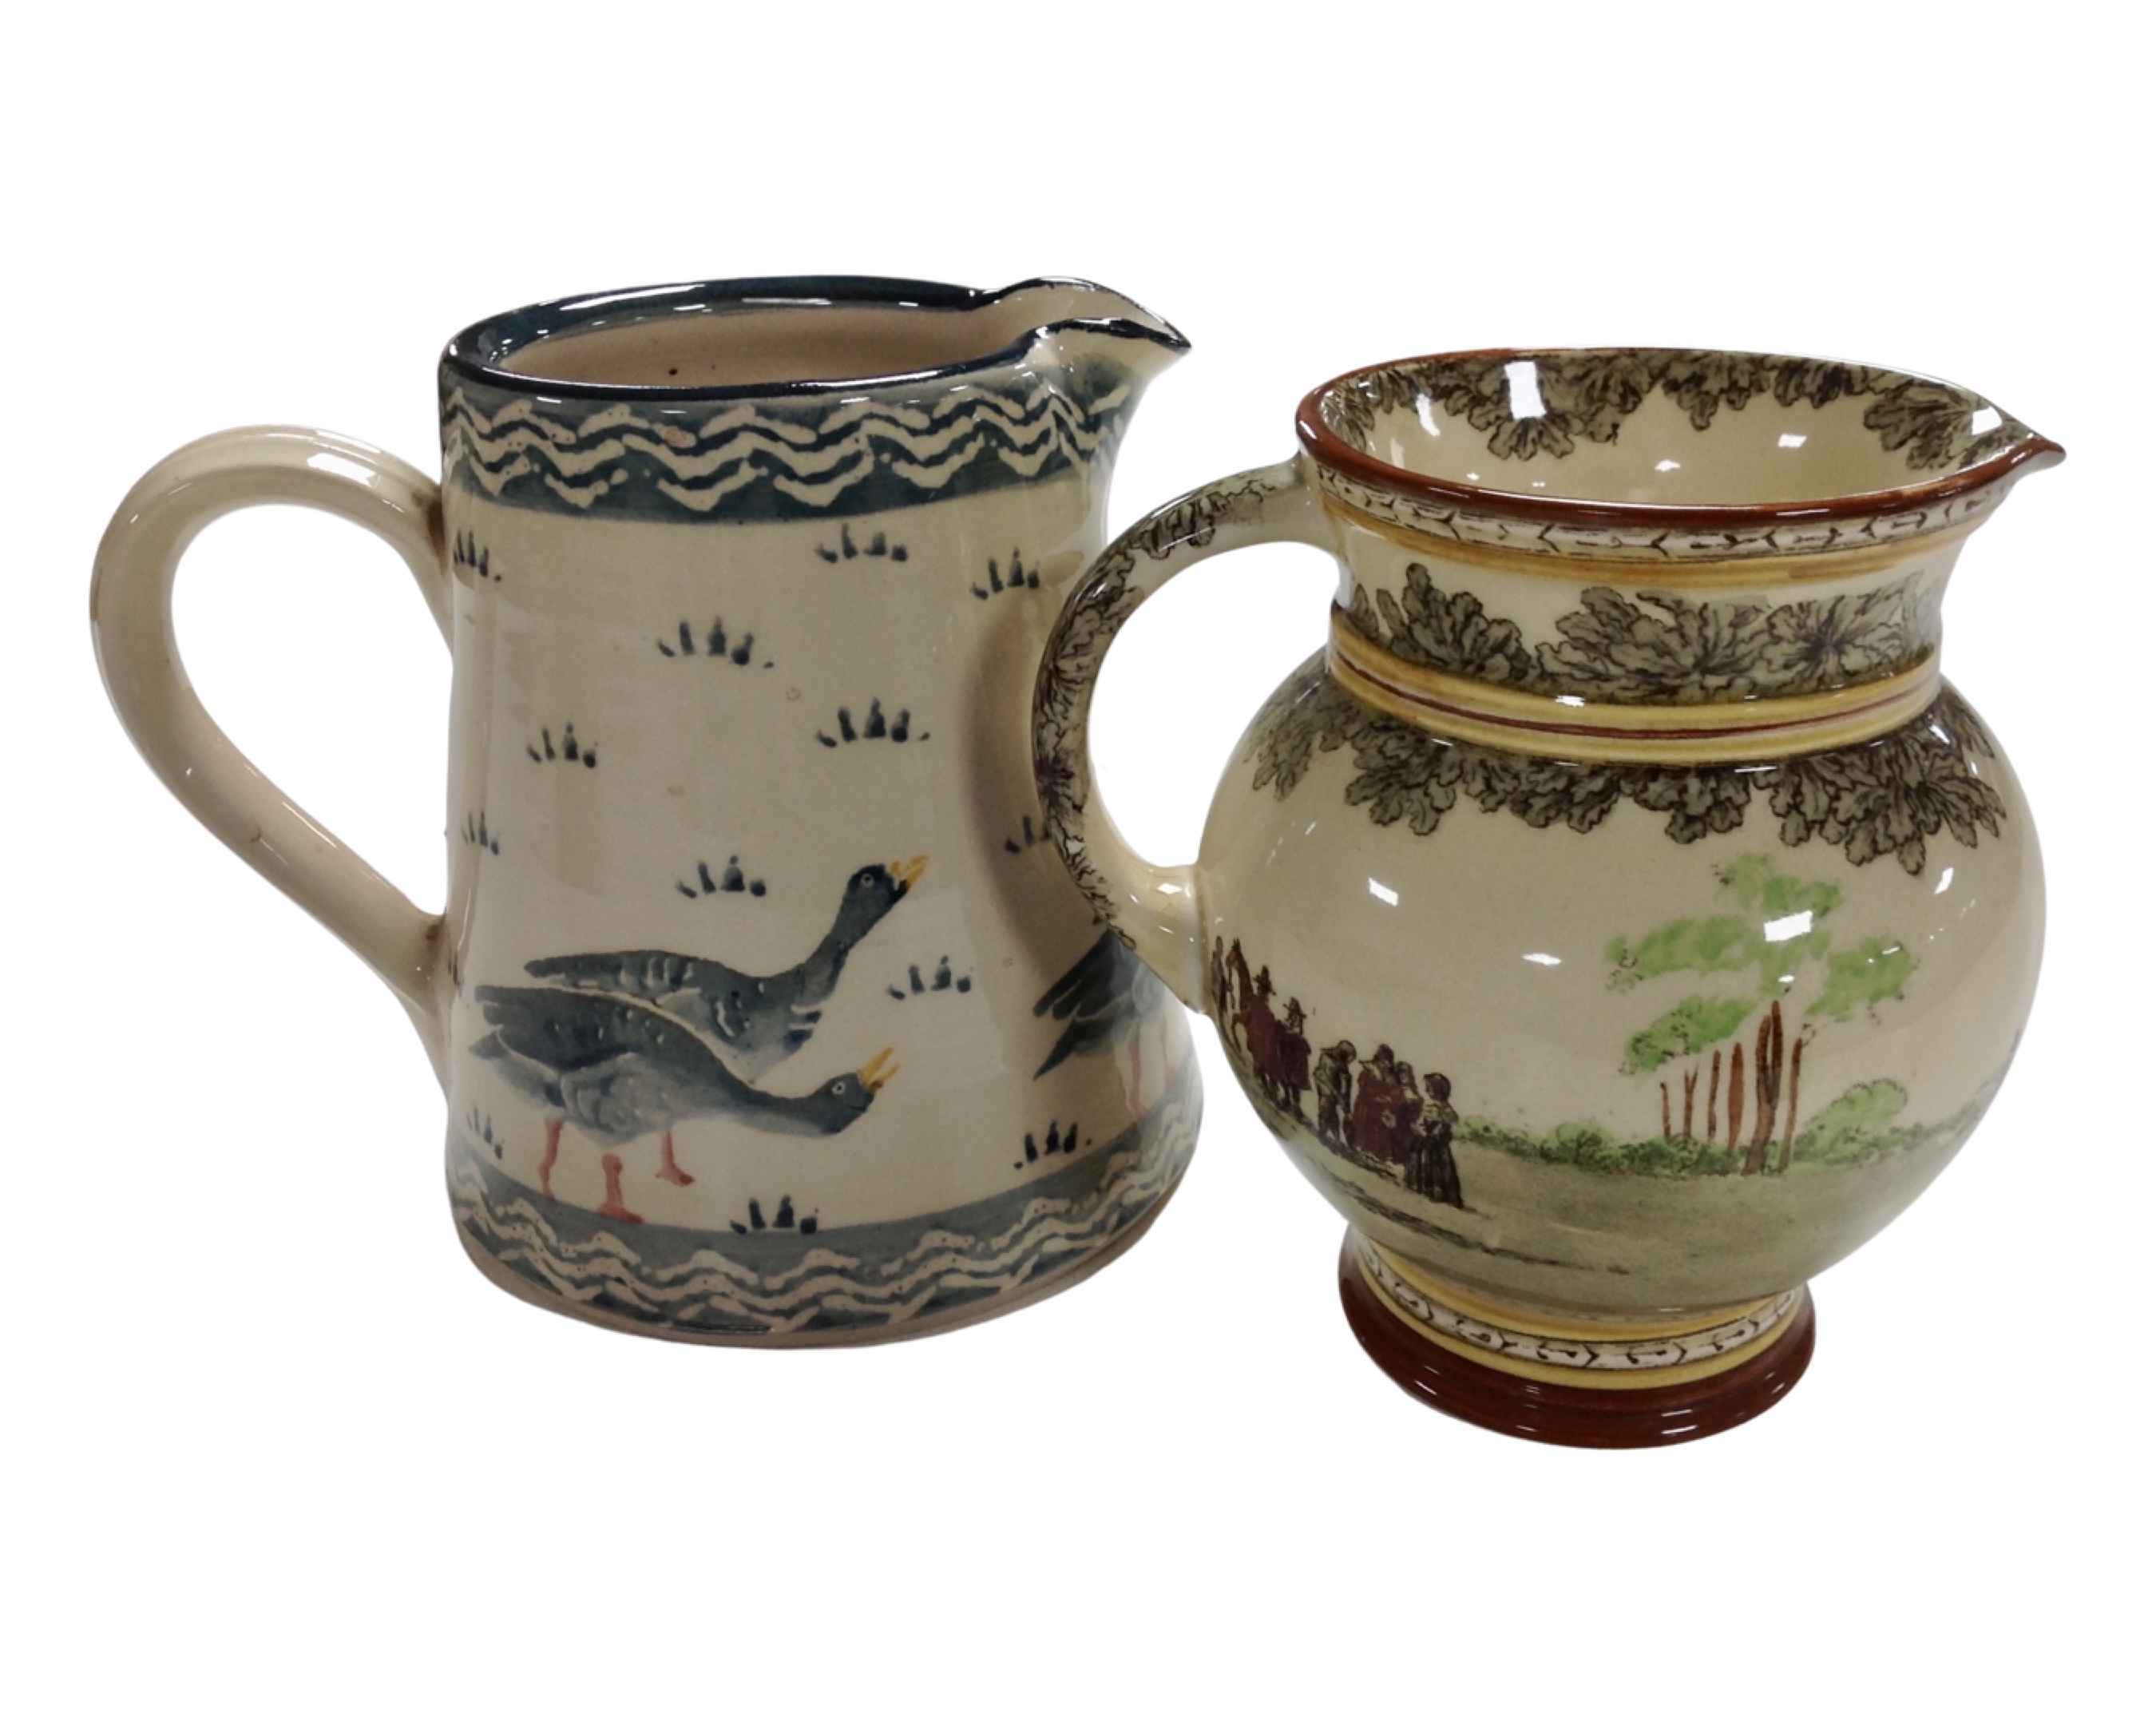 A Royal Doulton jug together with a further ceramic jug depicting ducks.